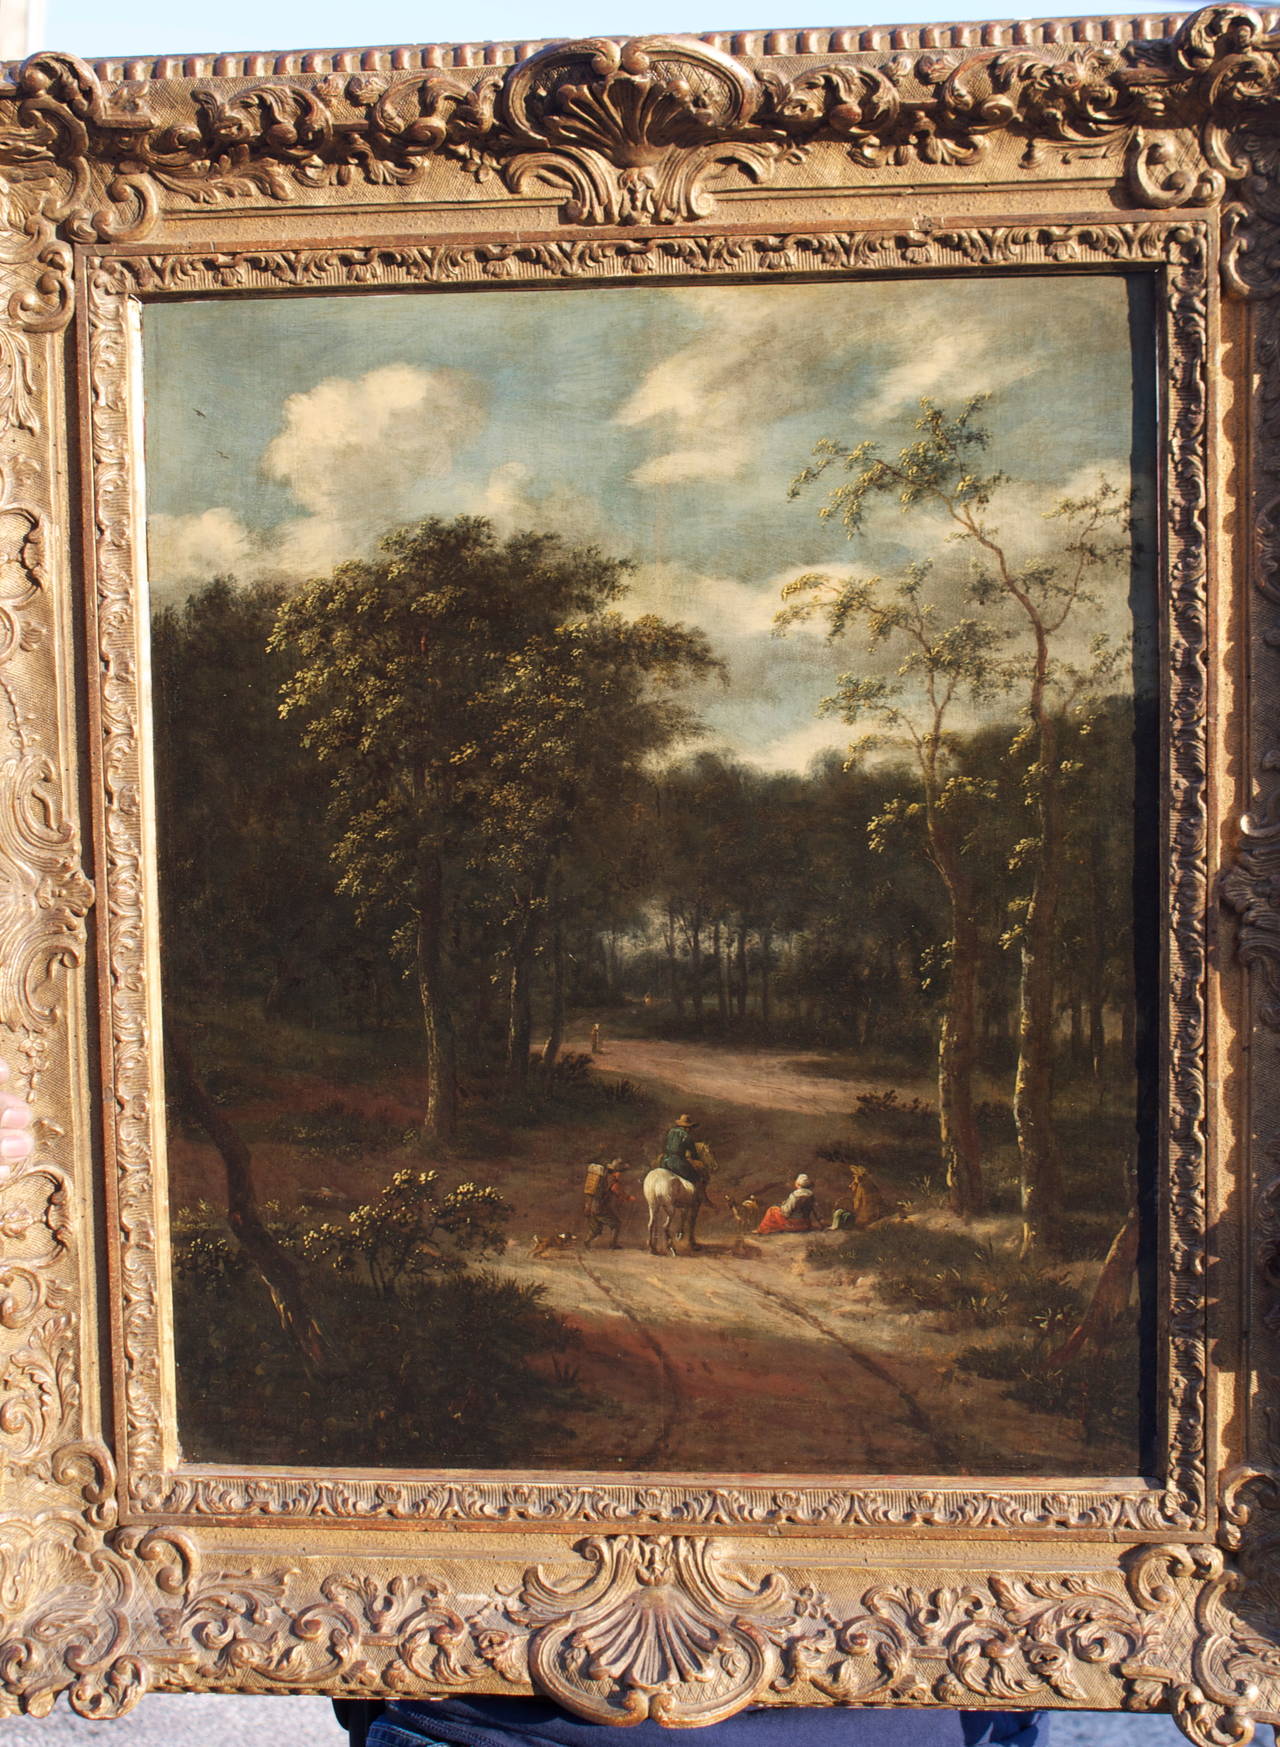 17thc. Dutch School, Forest Interior with Travelers at Rest - Black Landscape Painting by Unknown